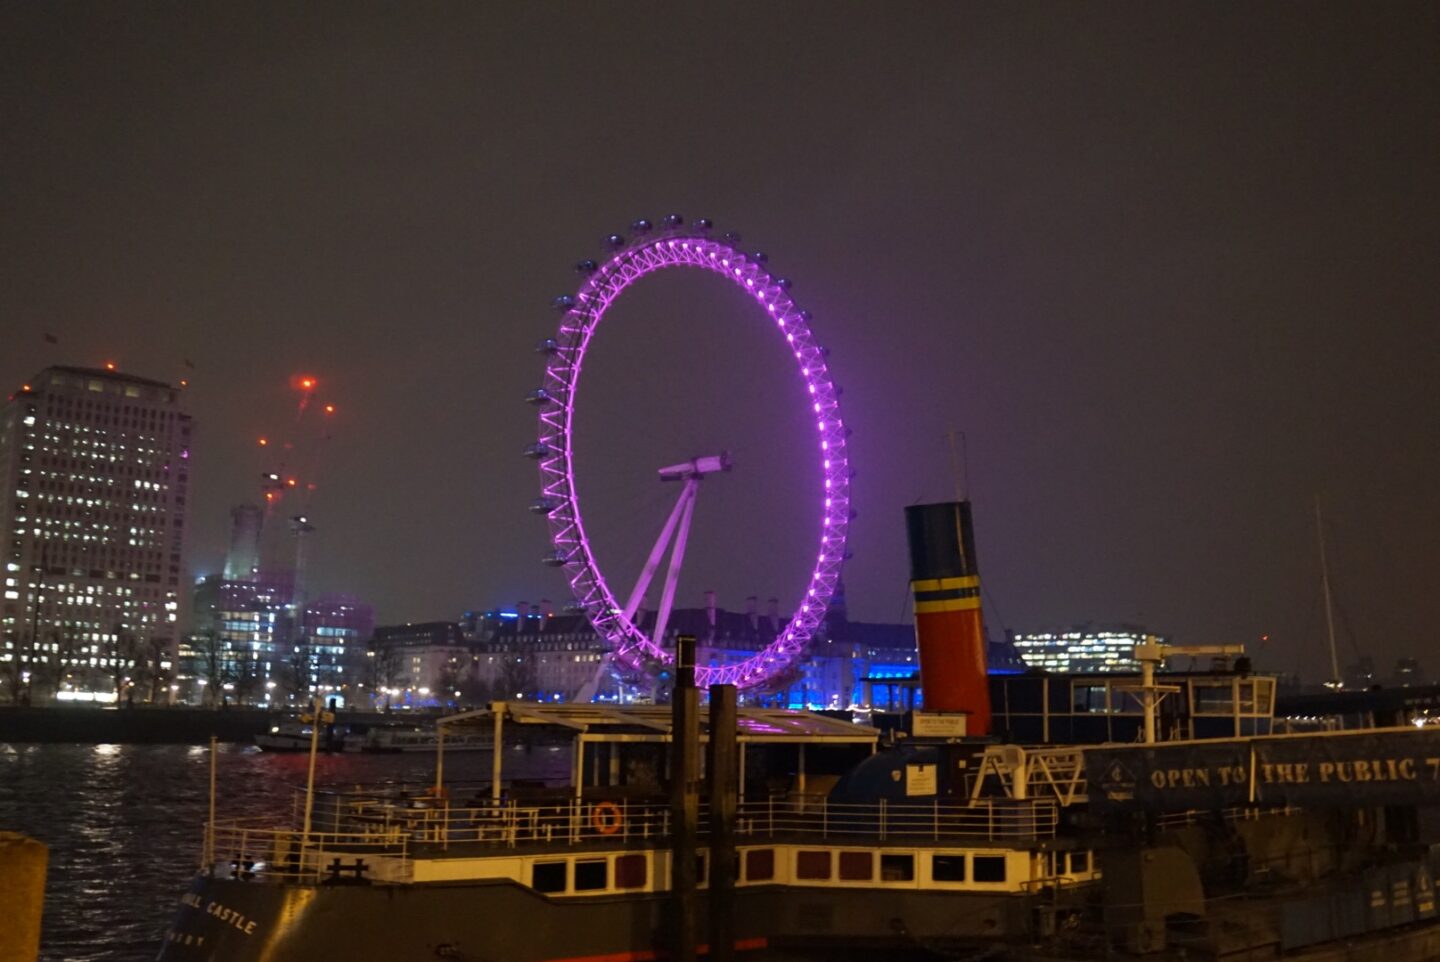 things to do in winter in London, London at night